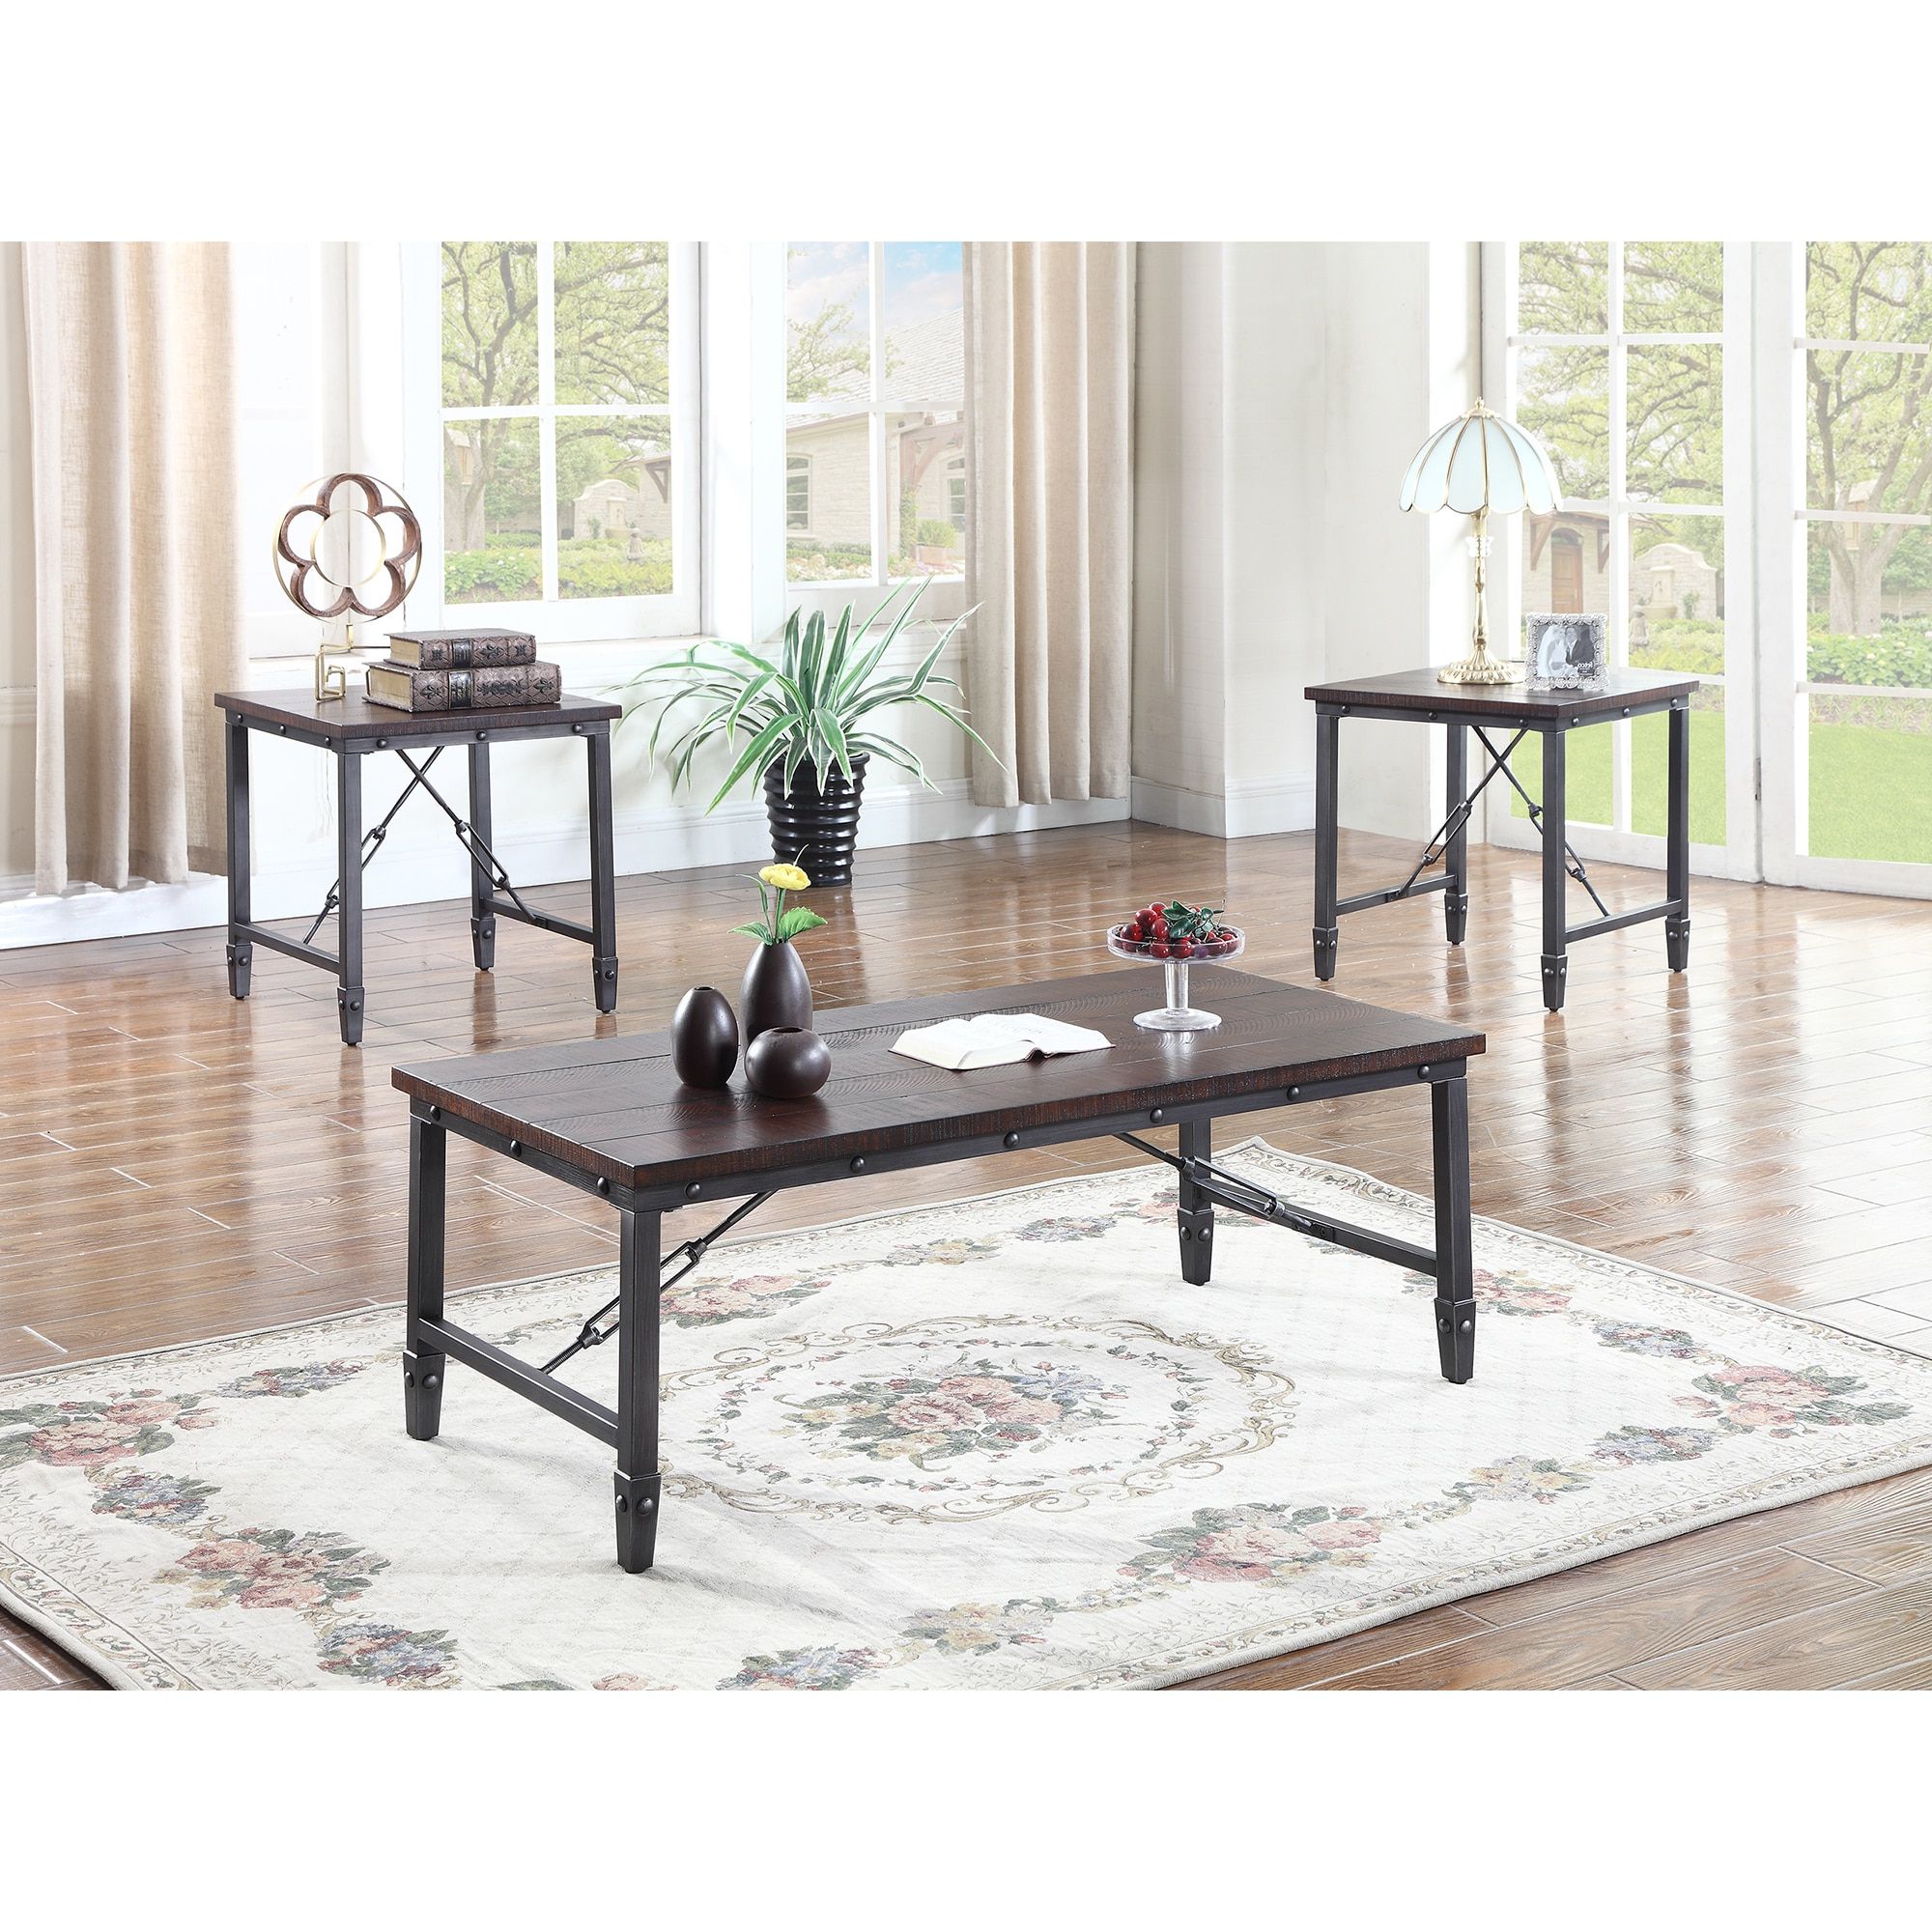 3 Piece Shelf Coffee Tables Within Preferred Best Master Furniture Dark Walnut With Black Iron Coffee Table 3 Piece (View 8 of 10)